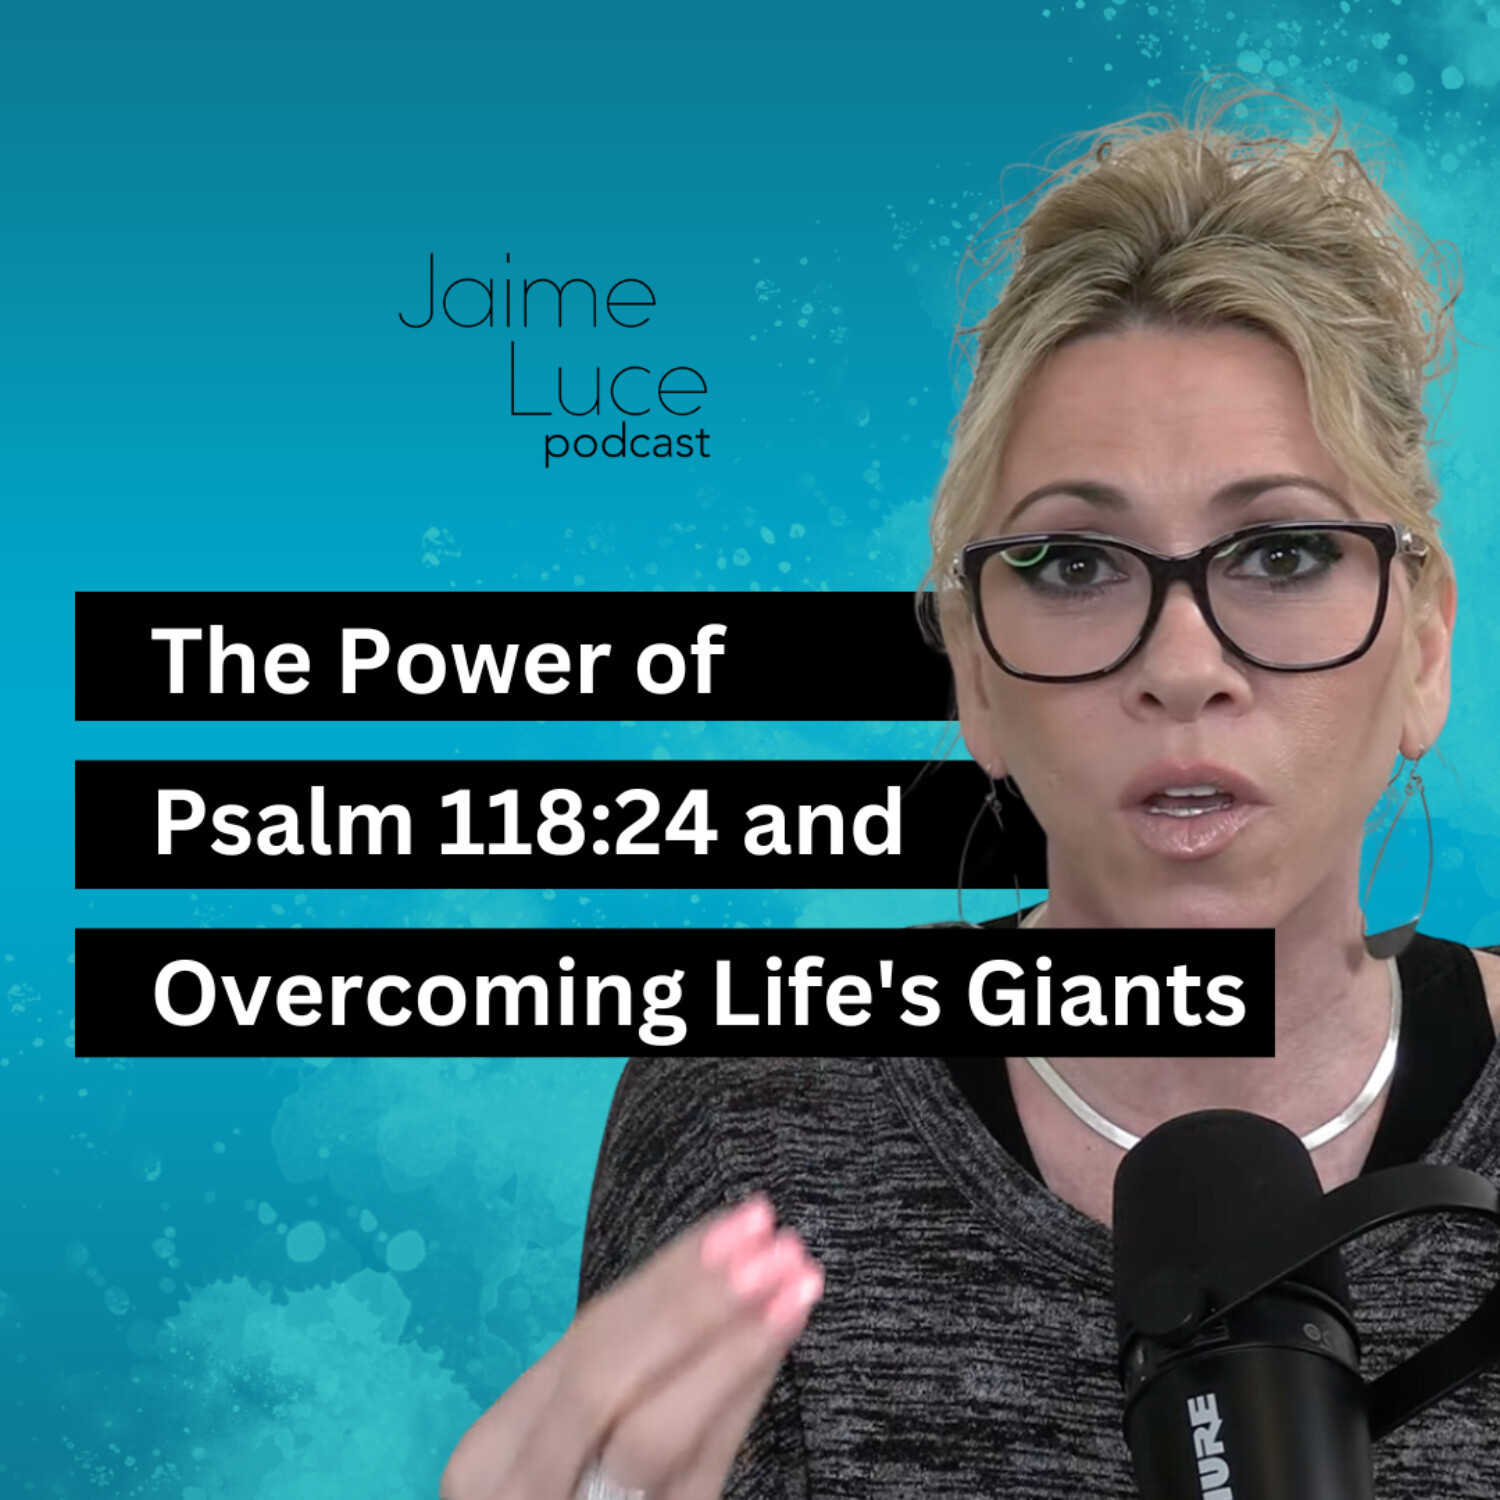 The Power of Psalm 118:24 and Overcoming Life's Giants